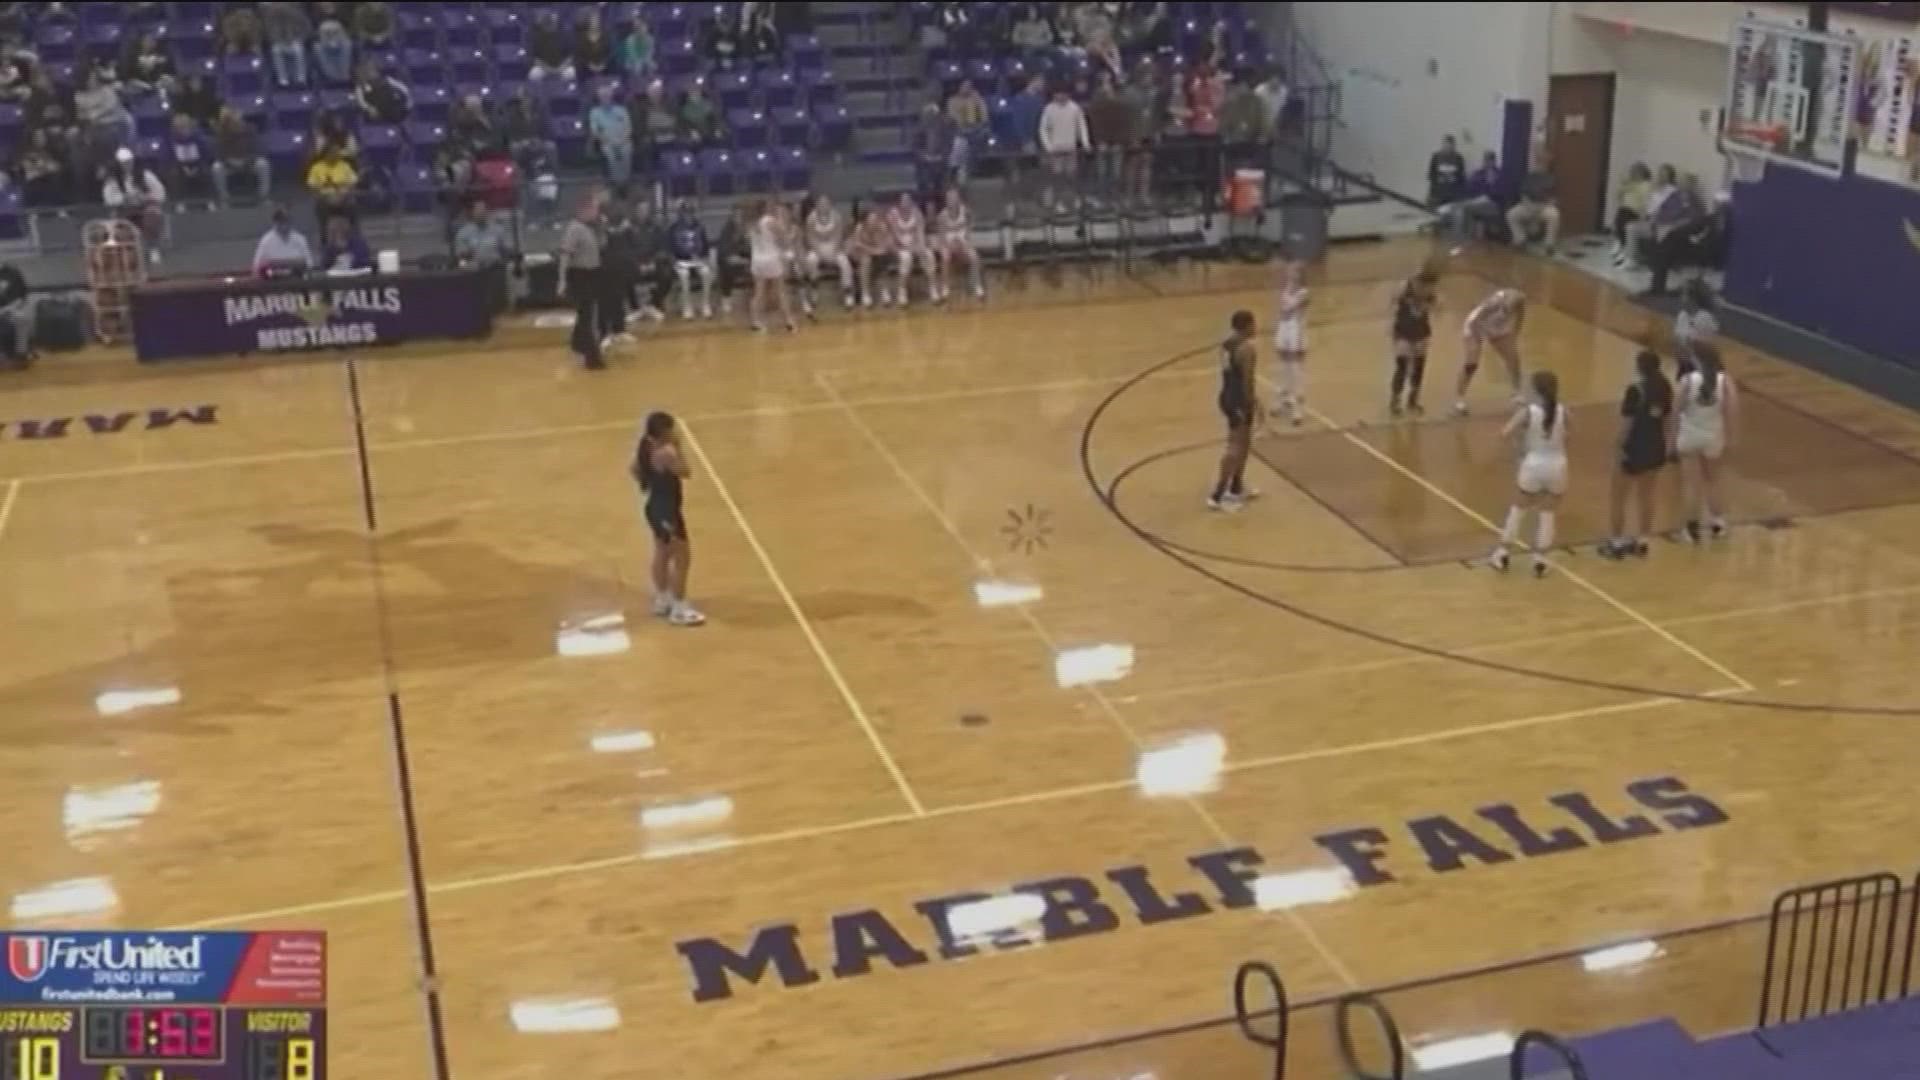 A San Antonio-area basketball player is addressing students making monkey noises at her during a game at Marble Falls High School. The district is now investigating.